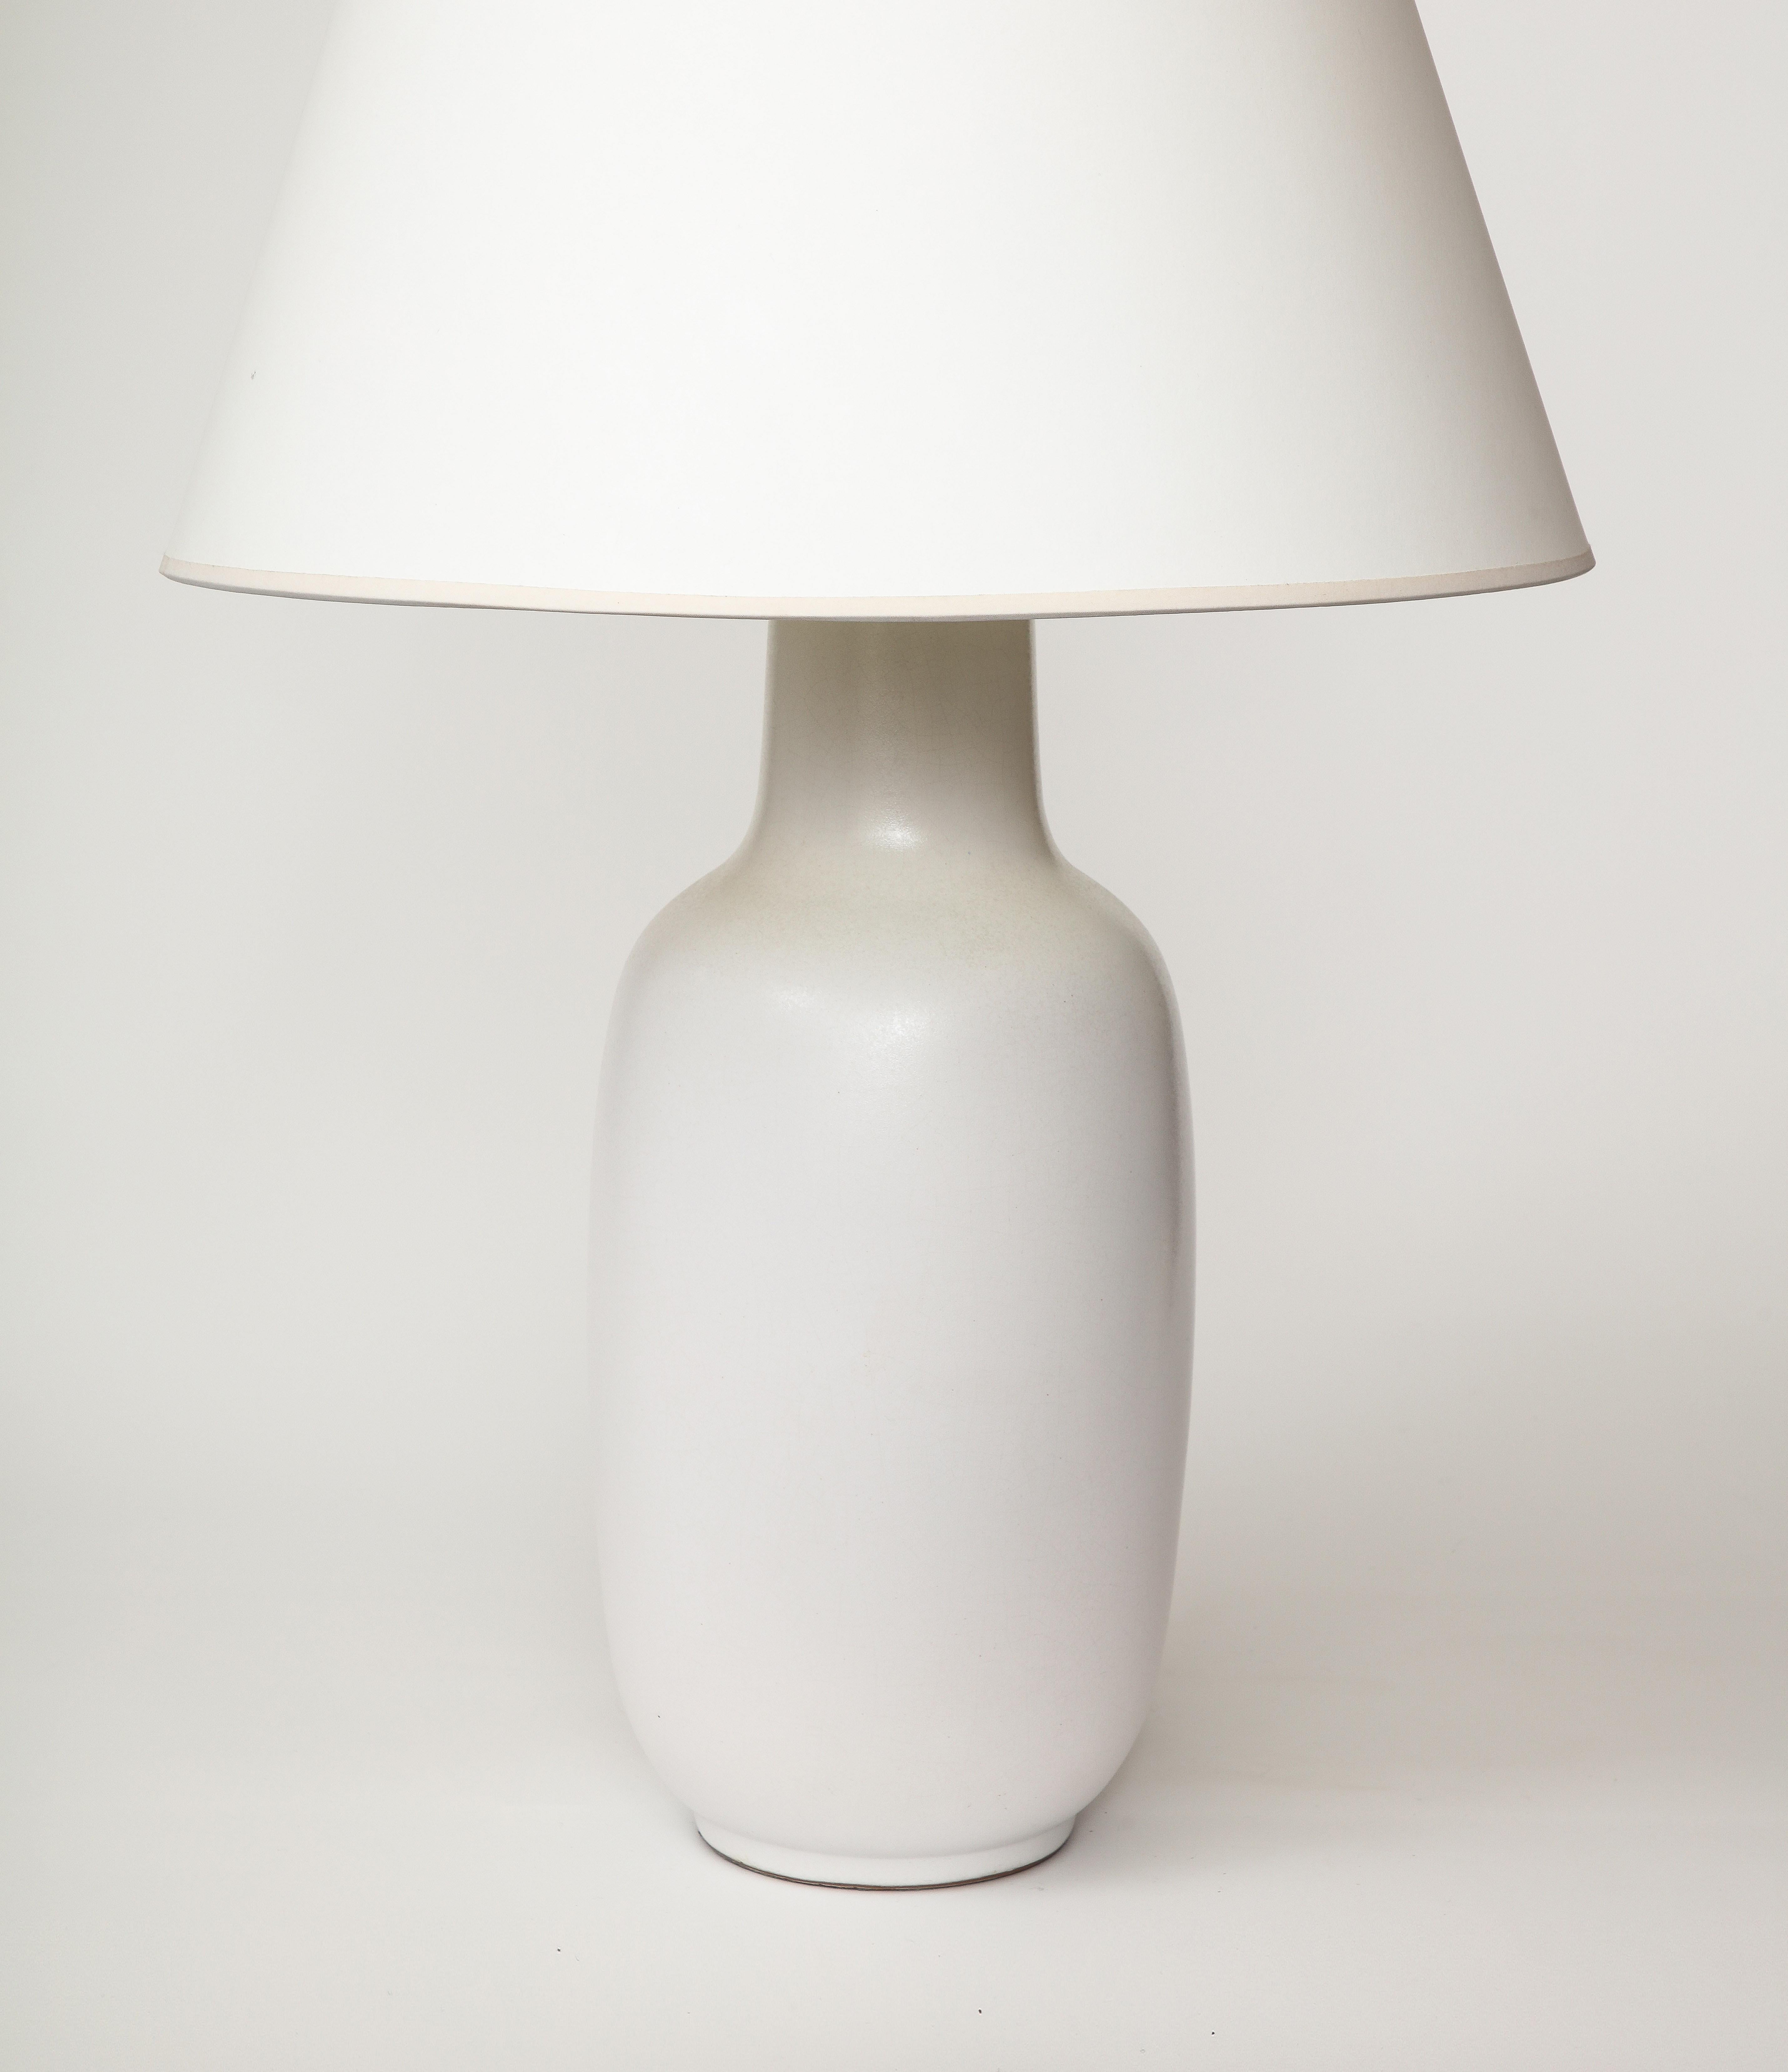 Glazed Ceramic Table Lamp by Design Technics, United States, c. 1960 For Sale 1